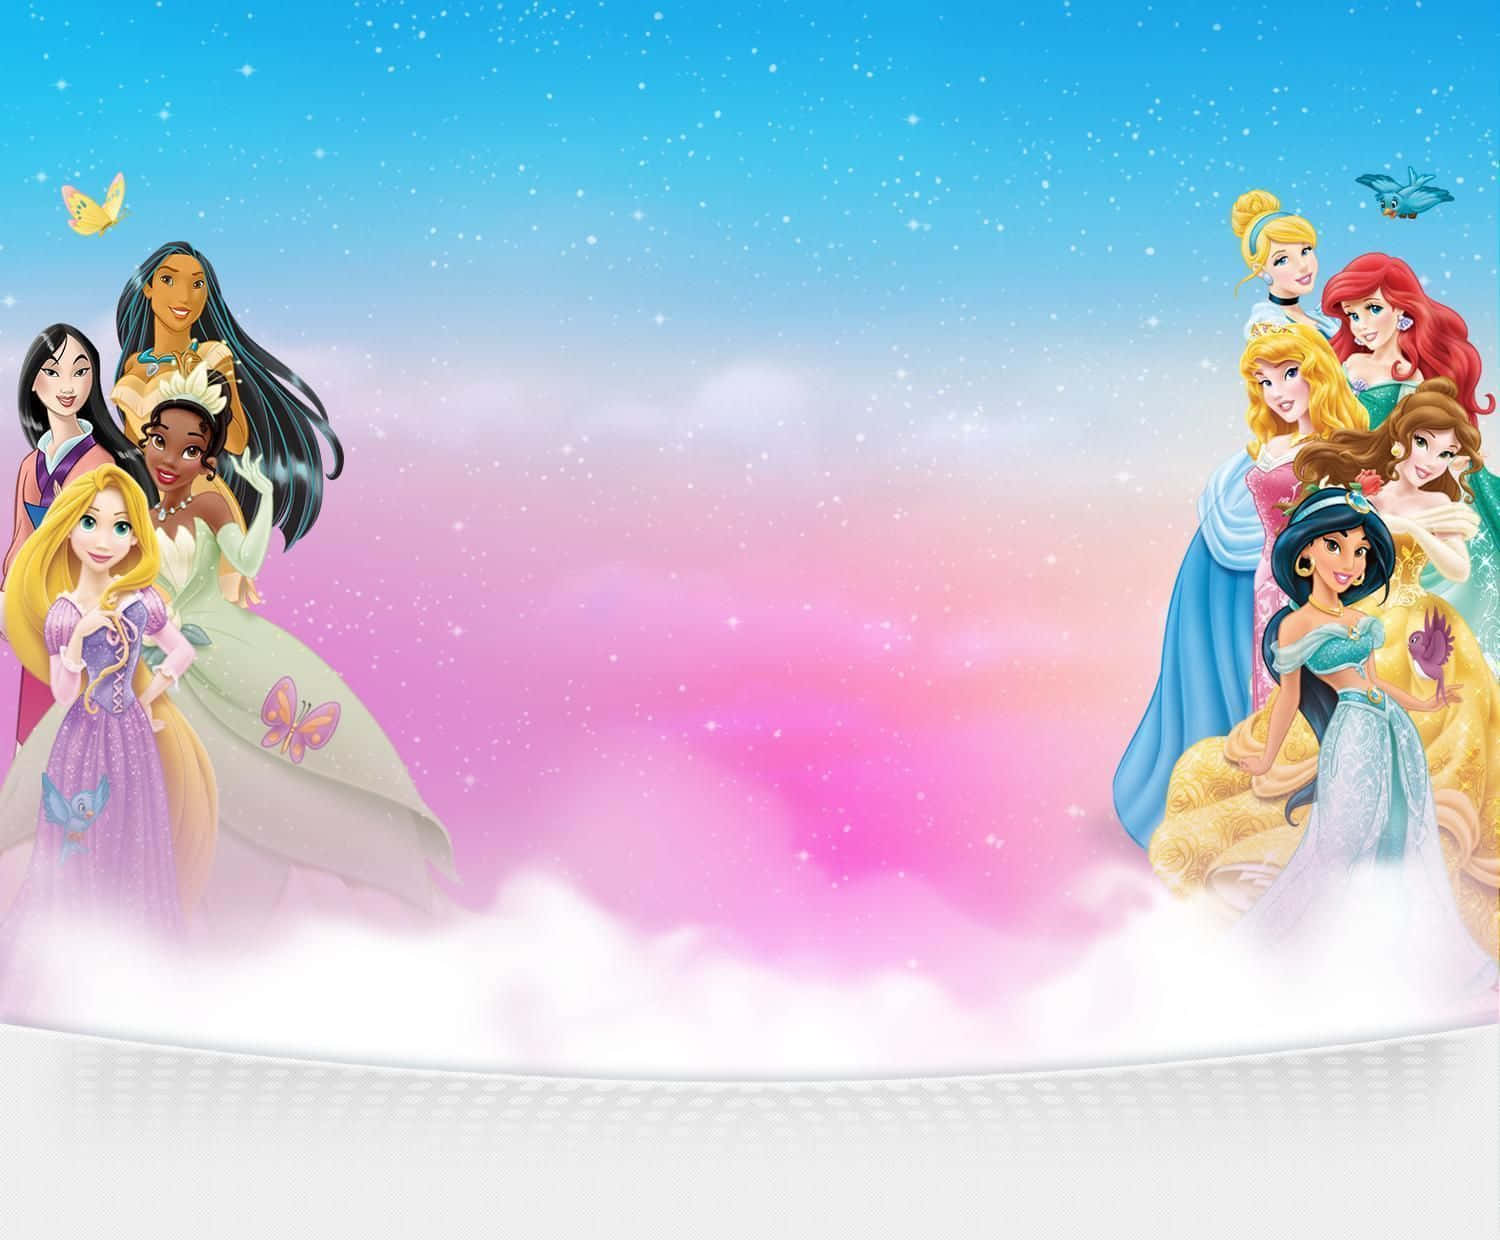 Celebrate your inner princess with Disney!